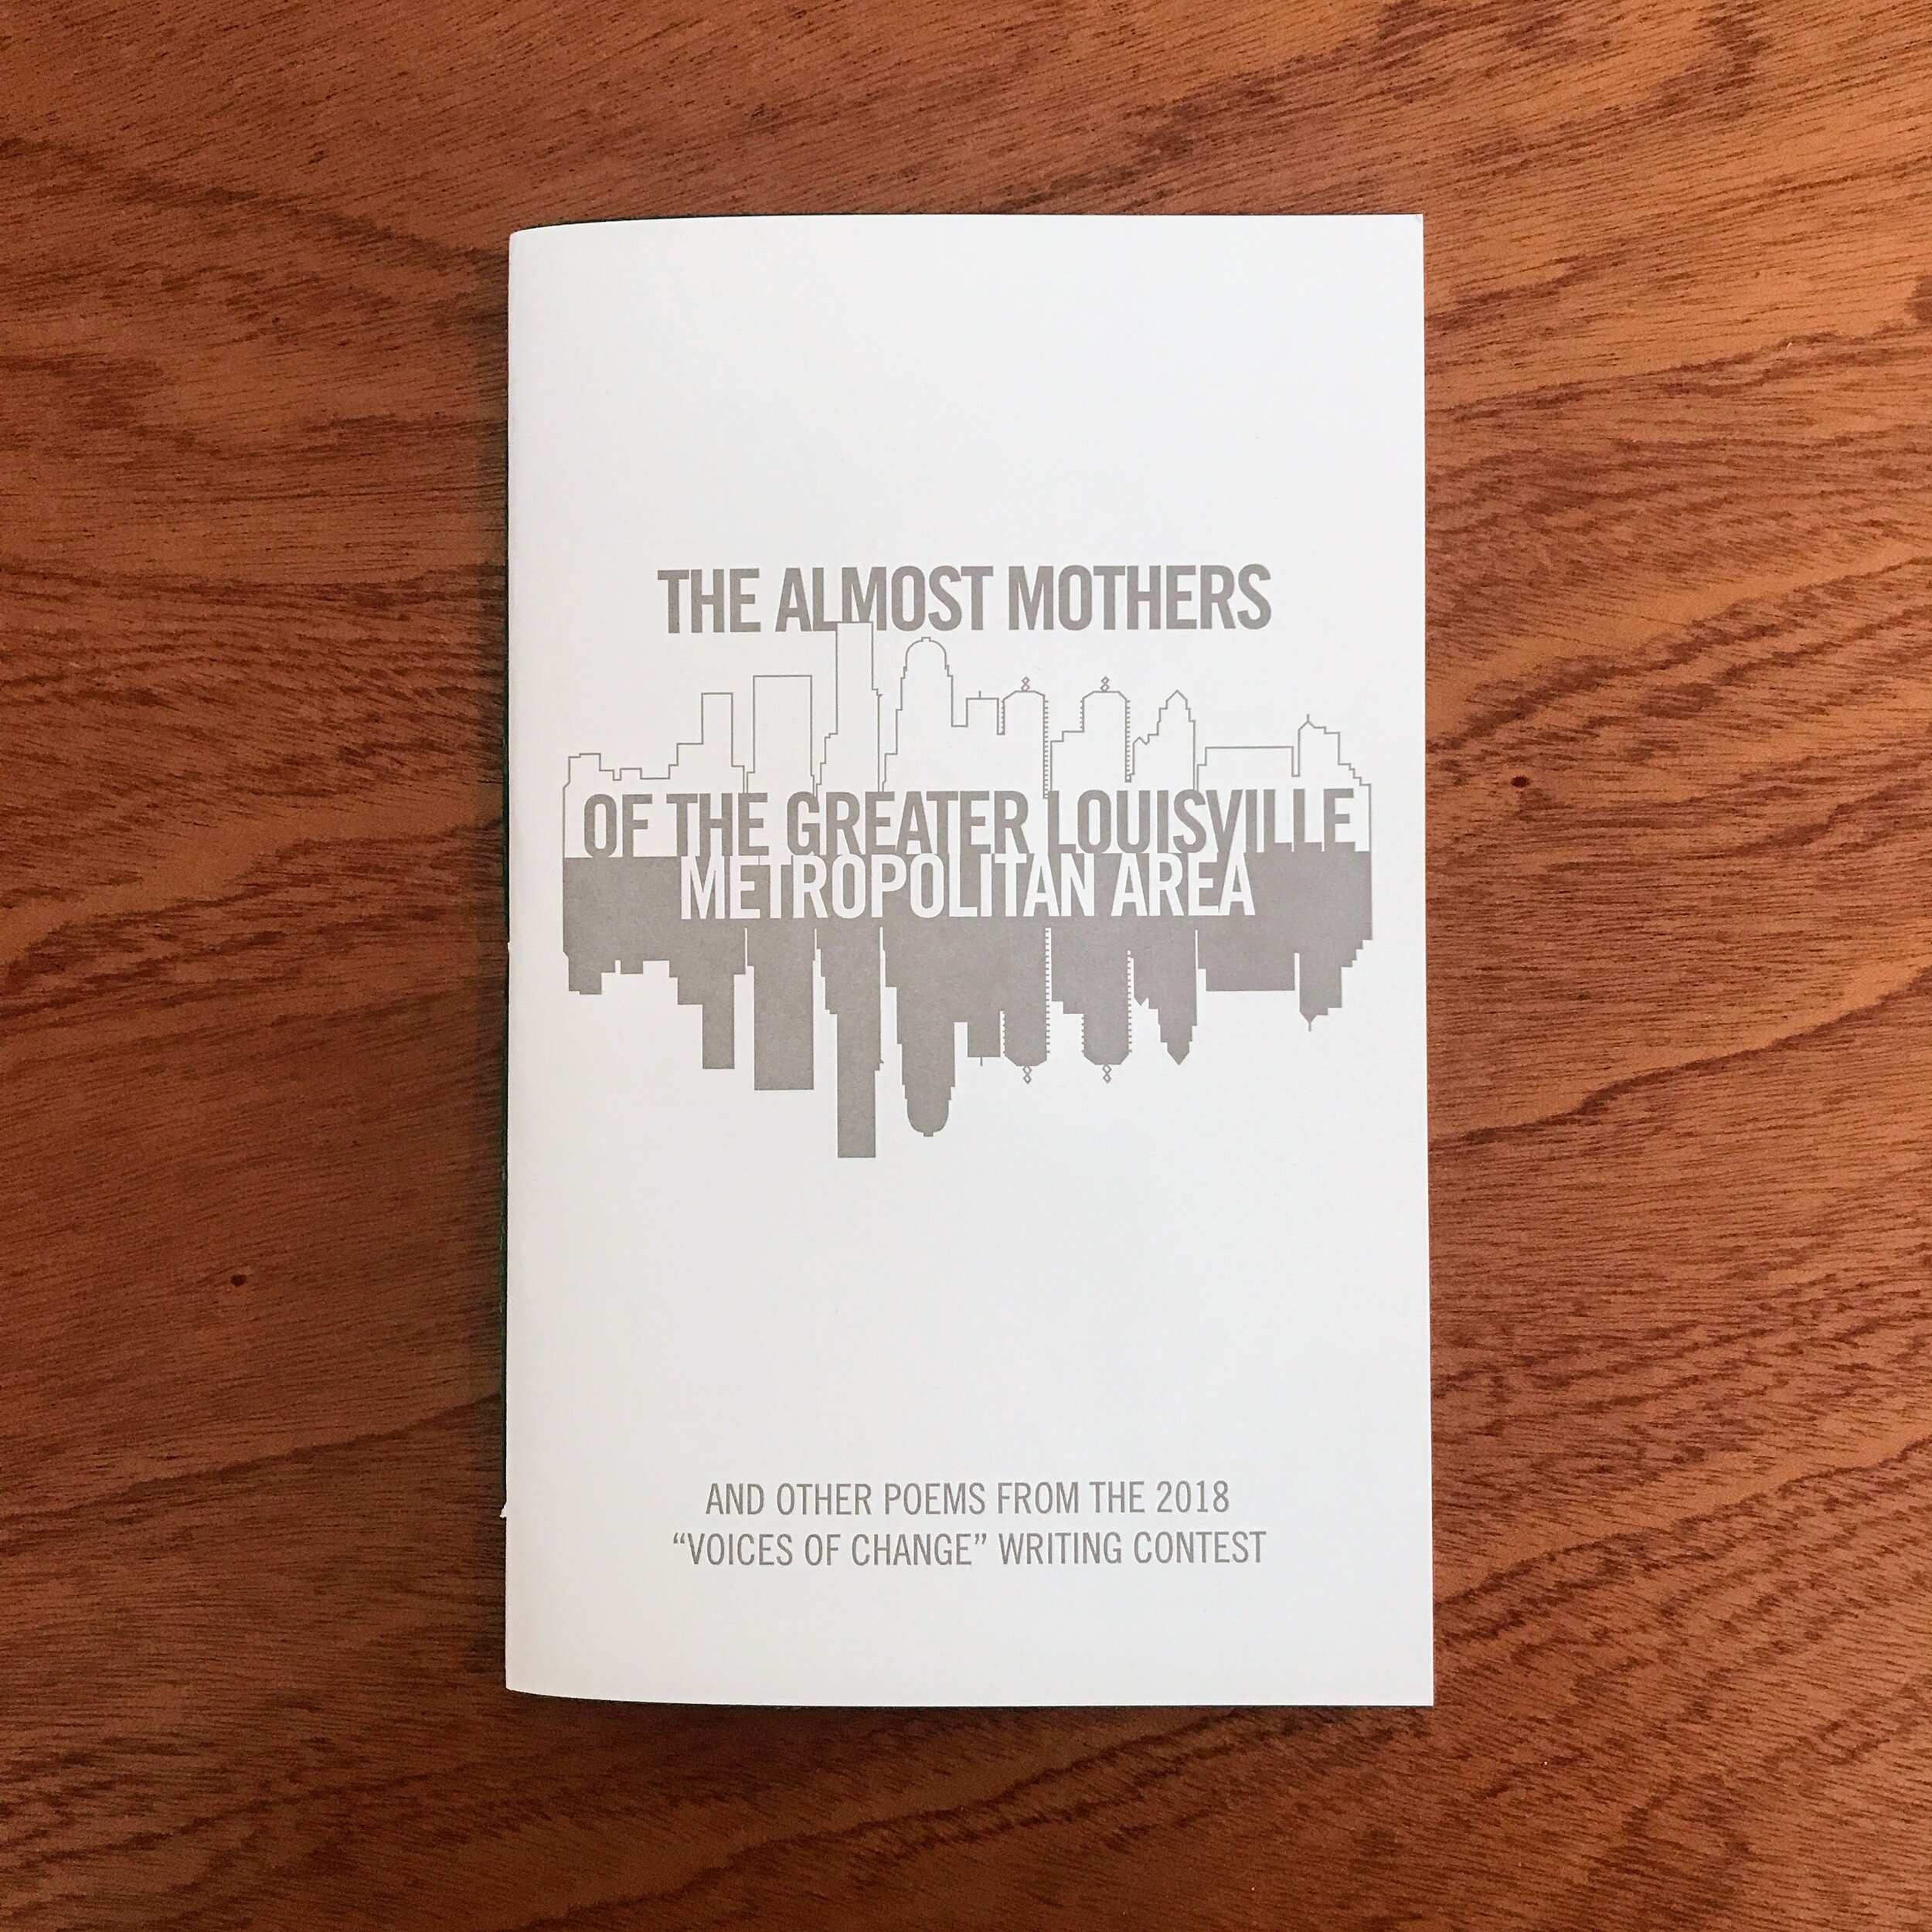 VOL. 10, THE ALMOST MOTHERS OF THE GREATER LOUISVILLE METROPOLITAN AREA